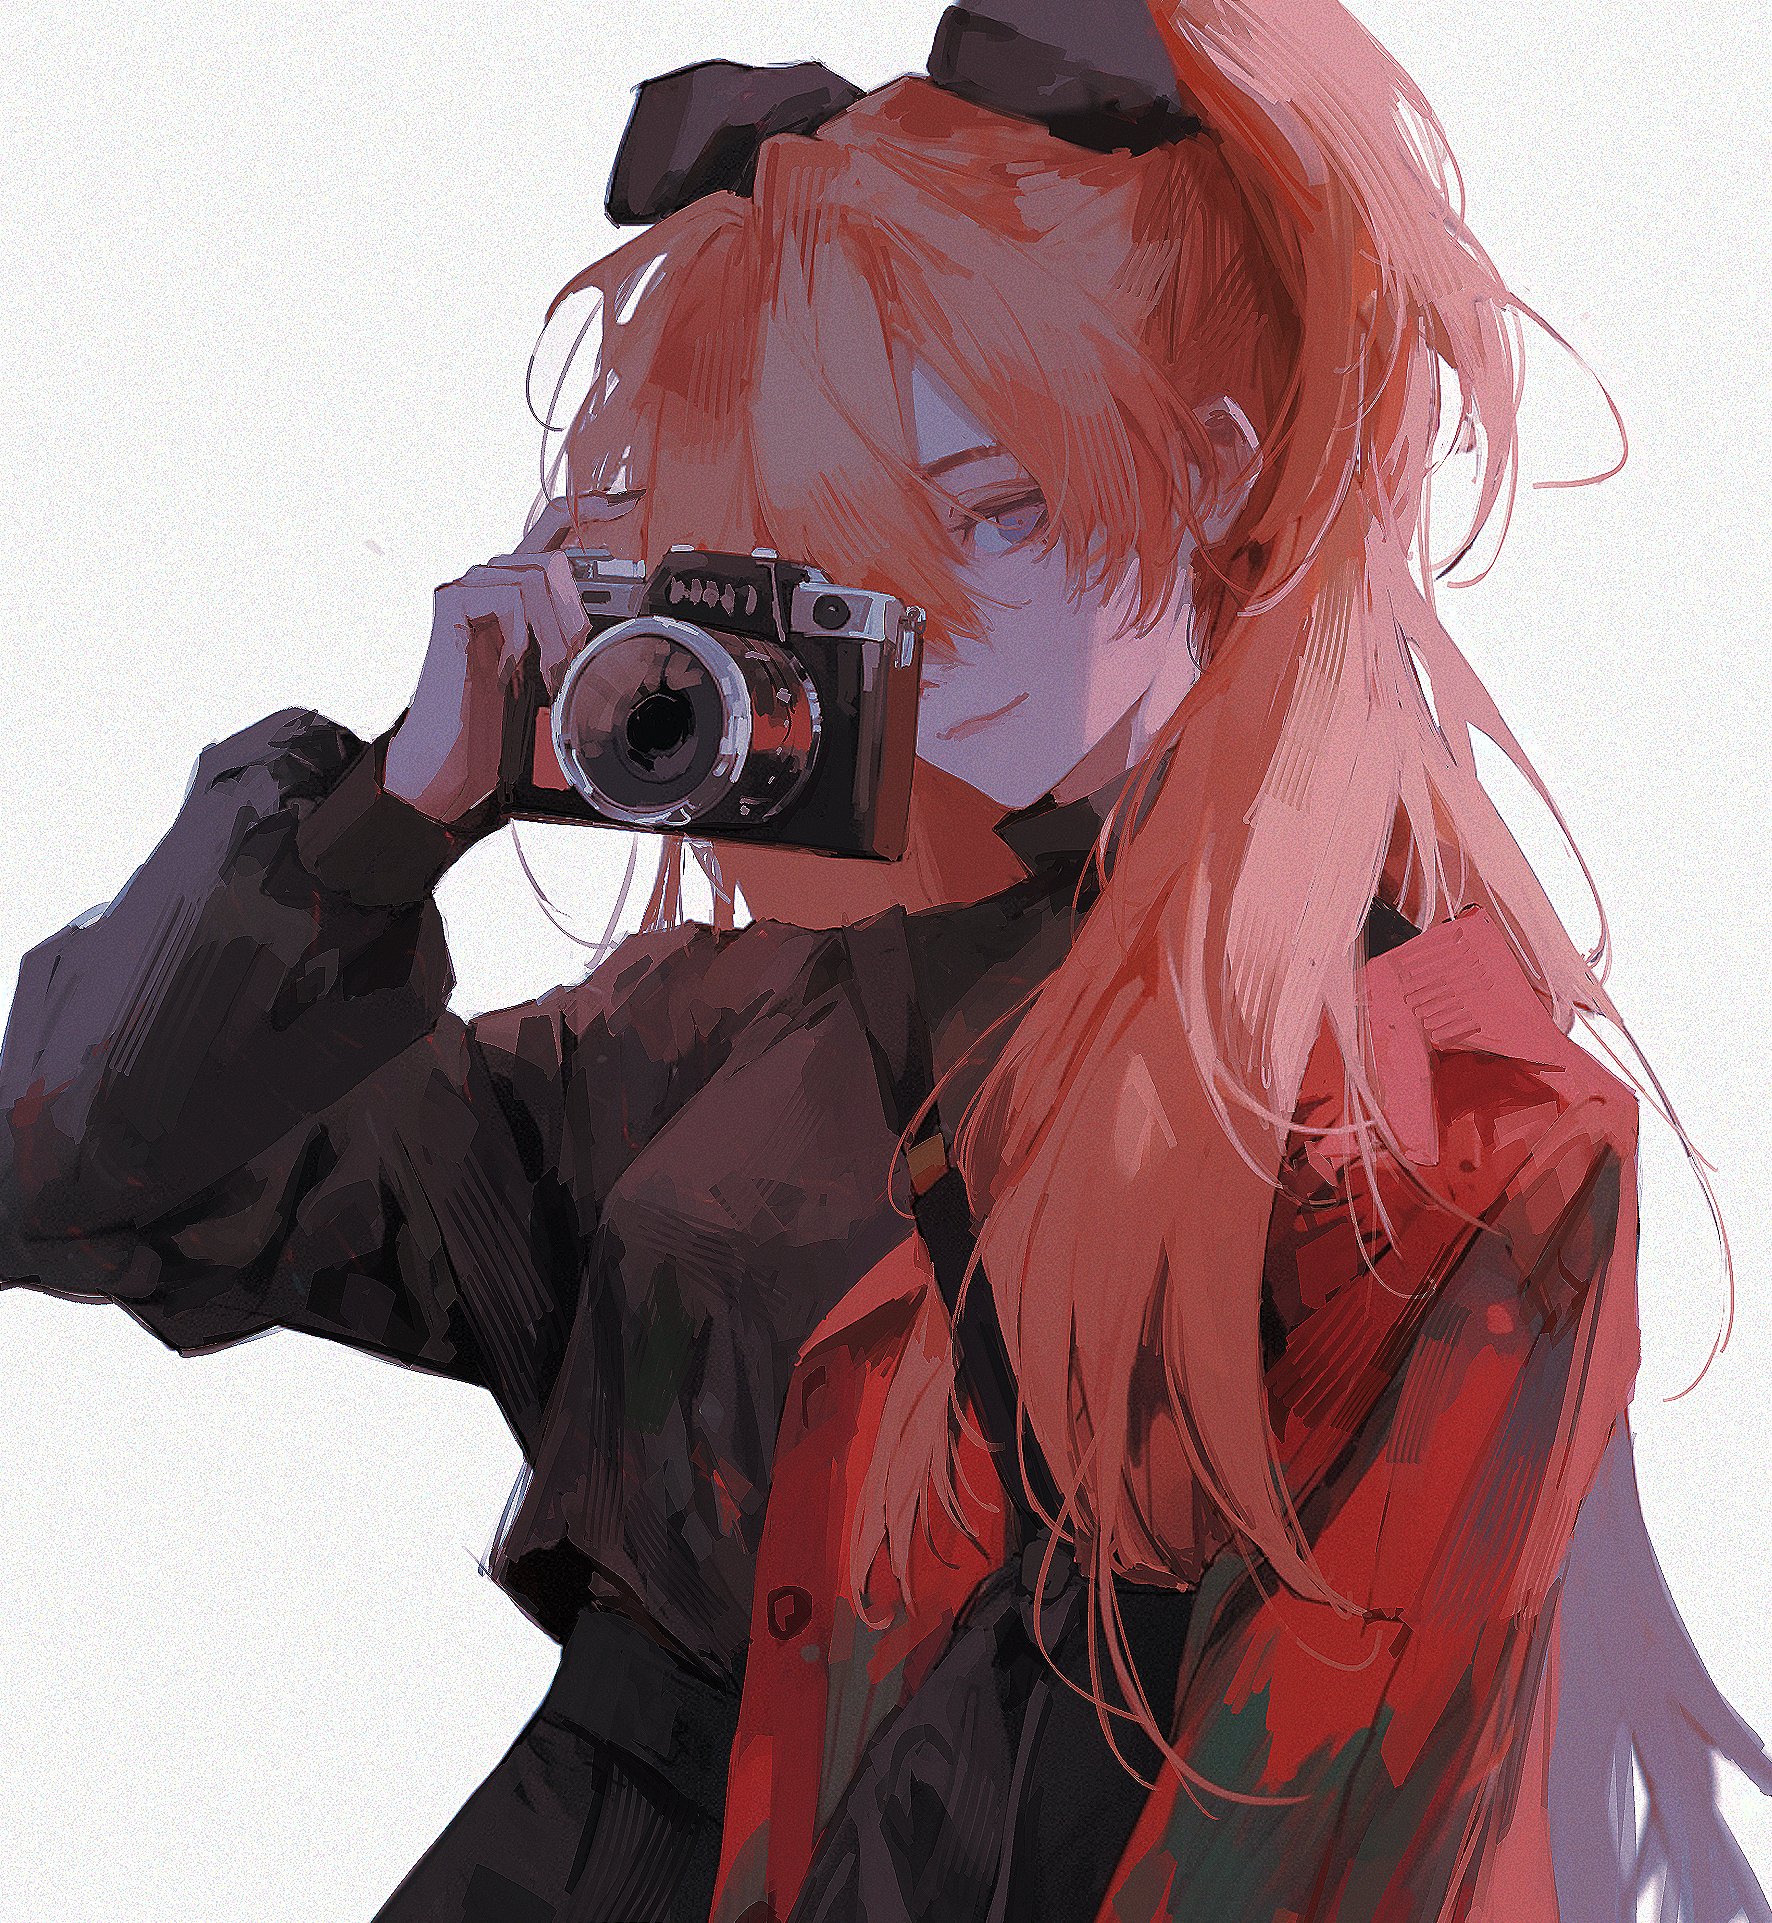 Anime 1772x1923 96yottea anime girls digital art illustration simple background ribbon drawing minimalism Asuka Langley Soryu Neon Genesis Evangelion looking at viewer redhead artwork closed mouth one eye obstructed camera portrait display bright long sleeves smiling long hair